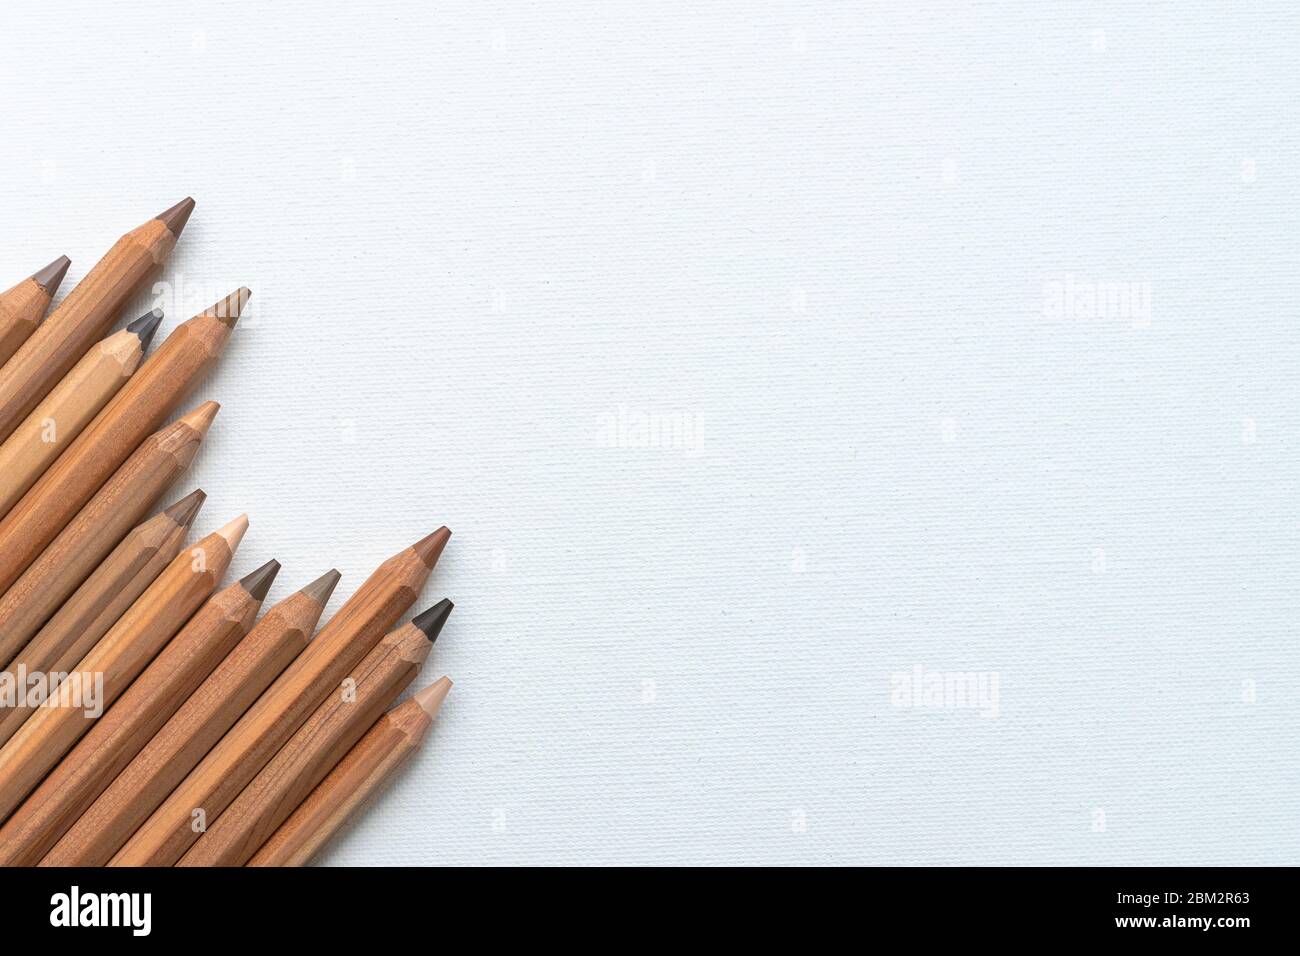 Pencil with diverse skin tone colors on a white canvas Stock Photo